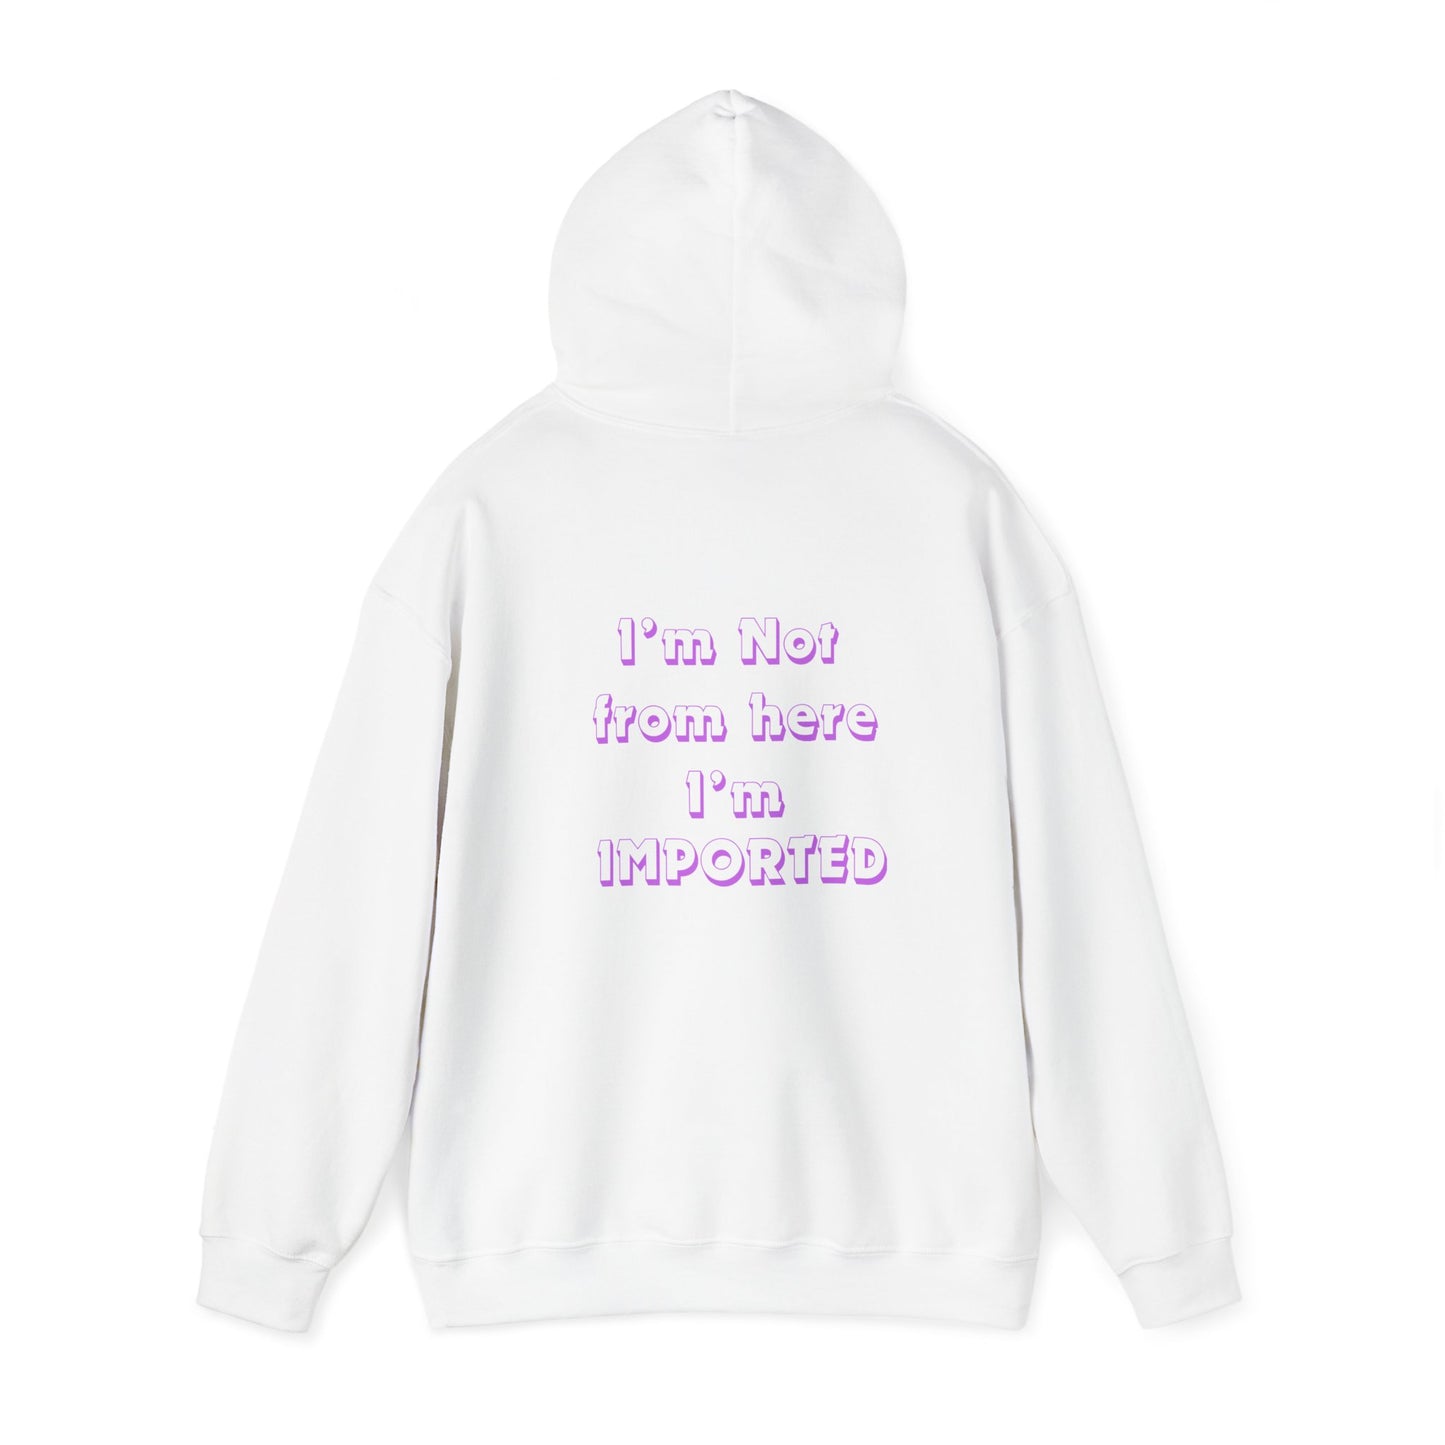 Unisex Heavy Blend™ "I'm Not From here, I'm imported" Hooded Sweatshirt